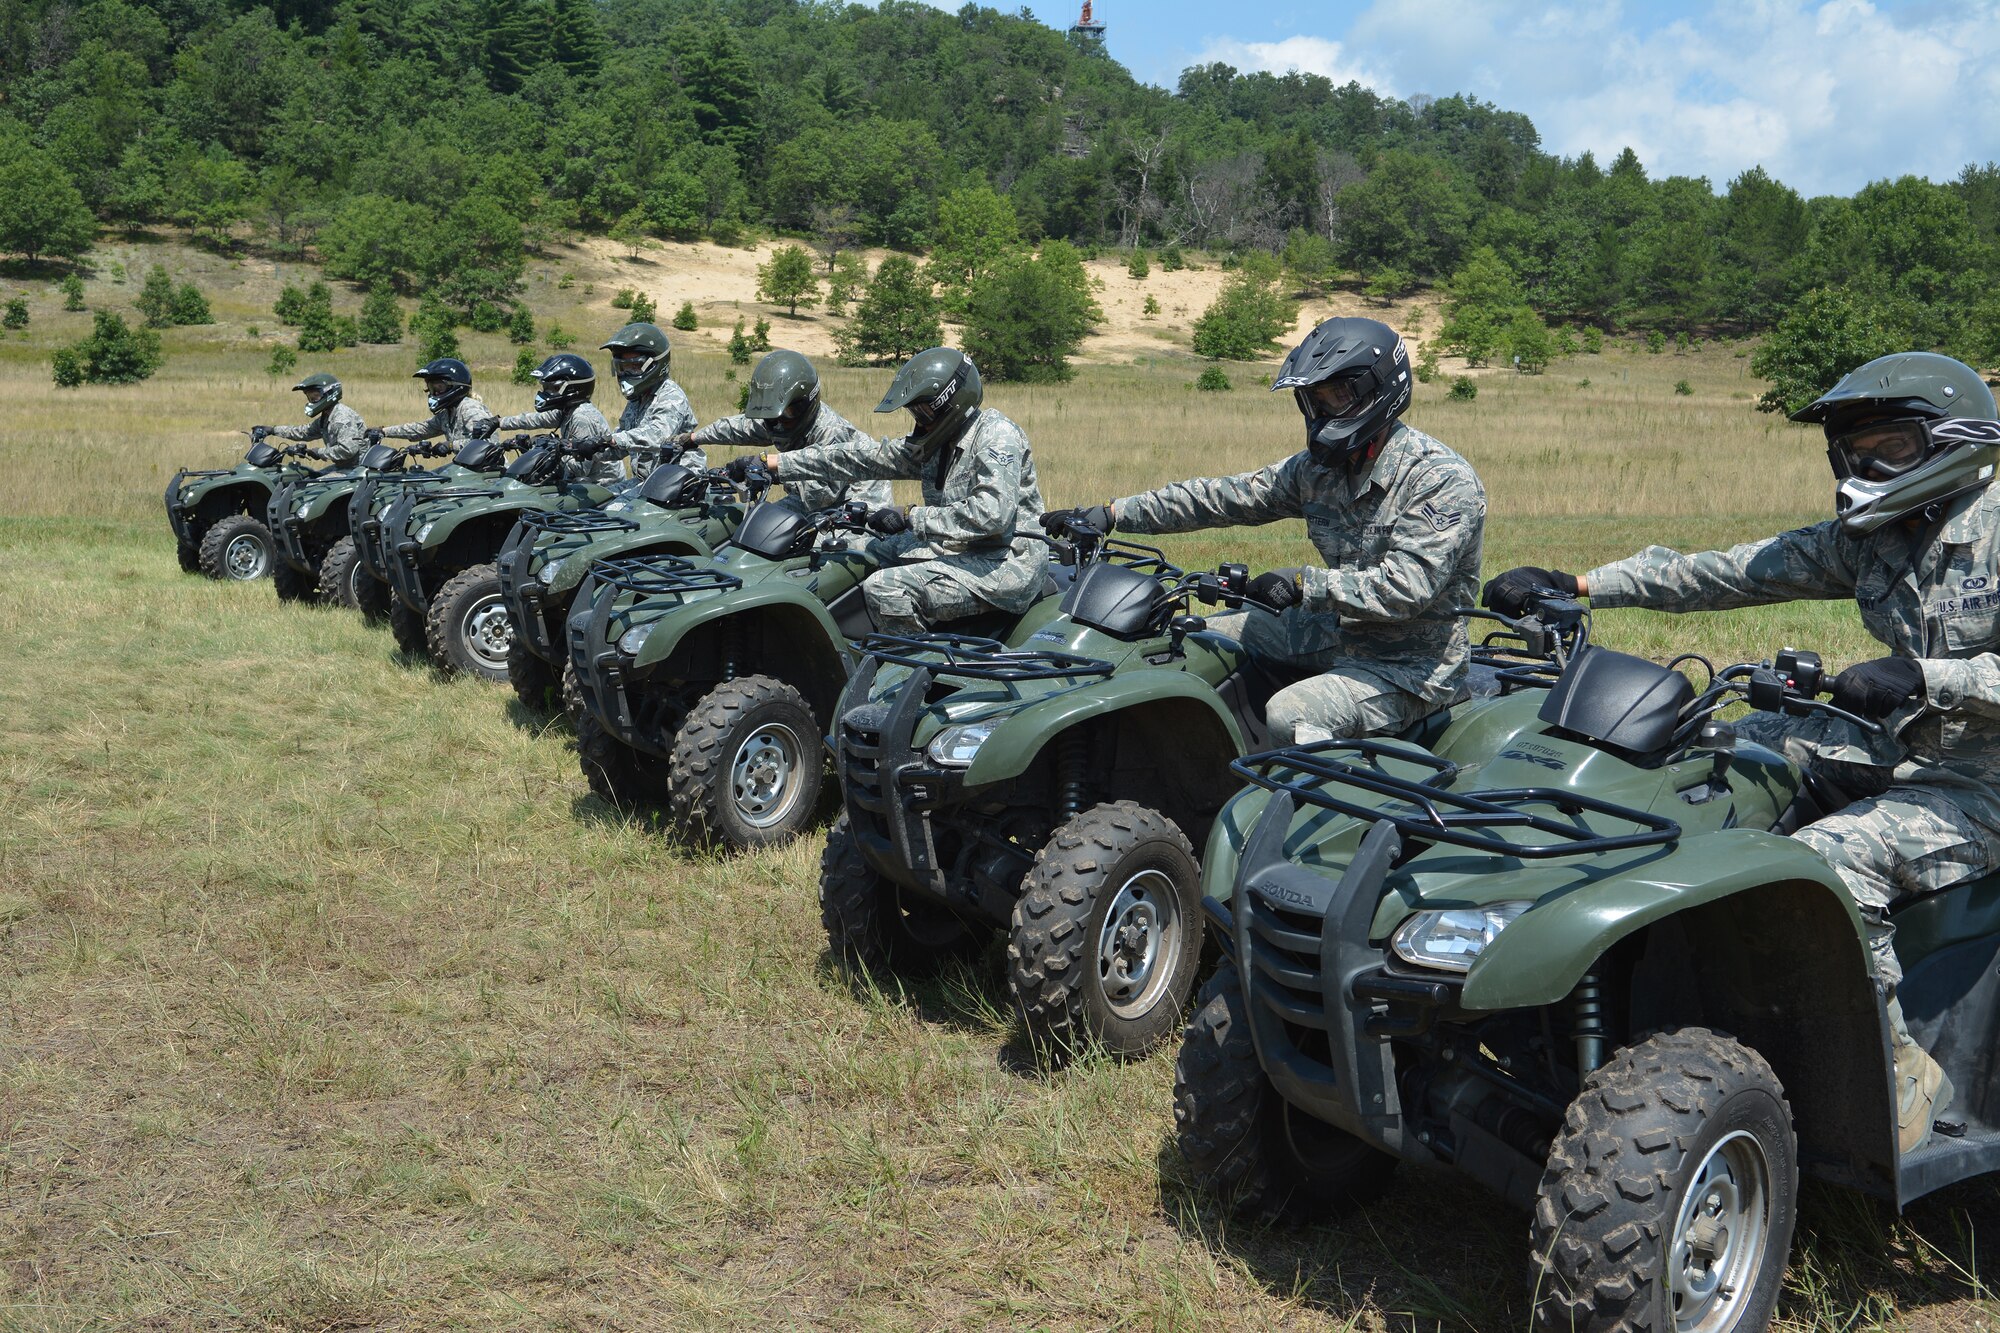 Airmen from Wisconsin prepare for their all-terrain vehicle ride after completing the first few lessons of the ATV certification course at Volk Field Air National Guard Base, Wis., July 30, 2014. The Airmen completed the course as part of the Junior Enlisted opportunity Program. They spent three days touring the 115th Fighter Wing, Volk Field and the 128th Air Refueling Wing to gain a better understanding of each bases’ mission. (Photo courtesy of Master Sgt. Sara Jensen)
